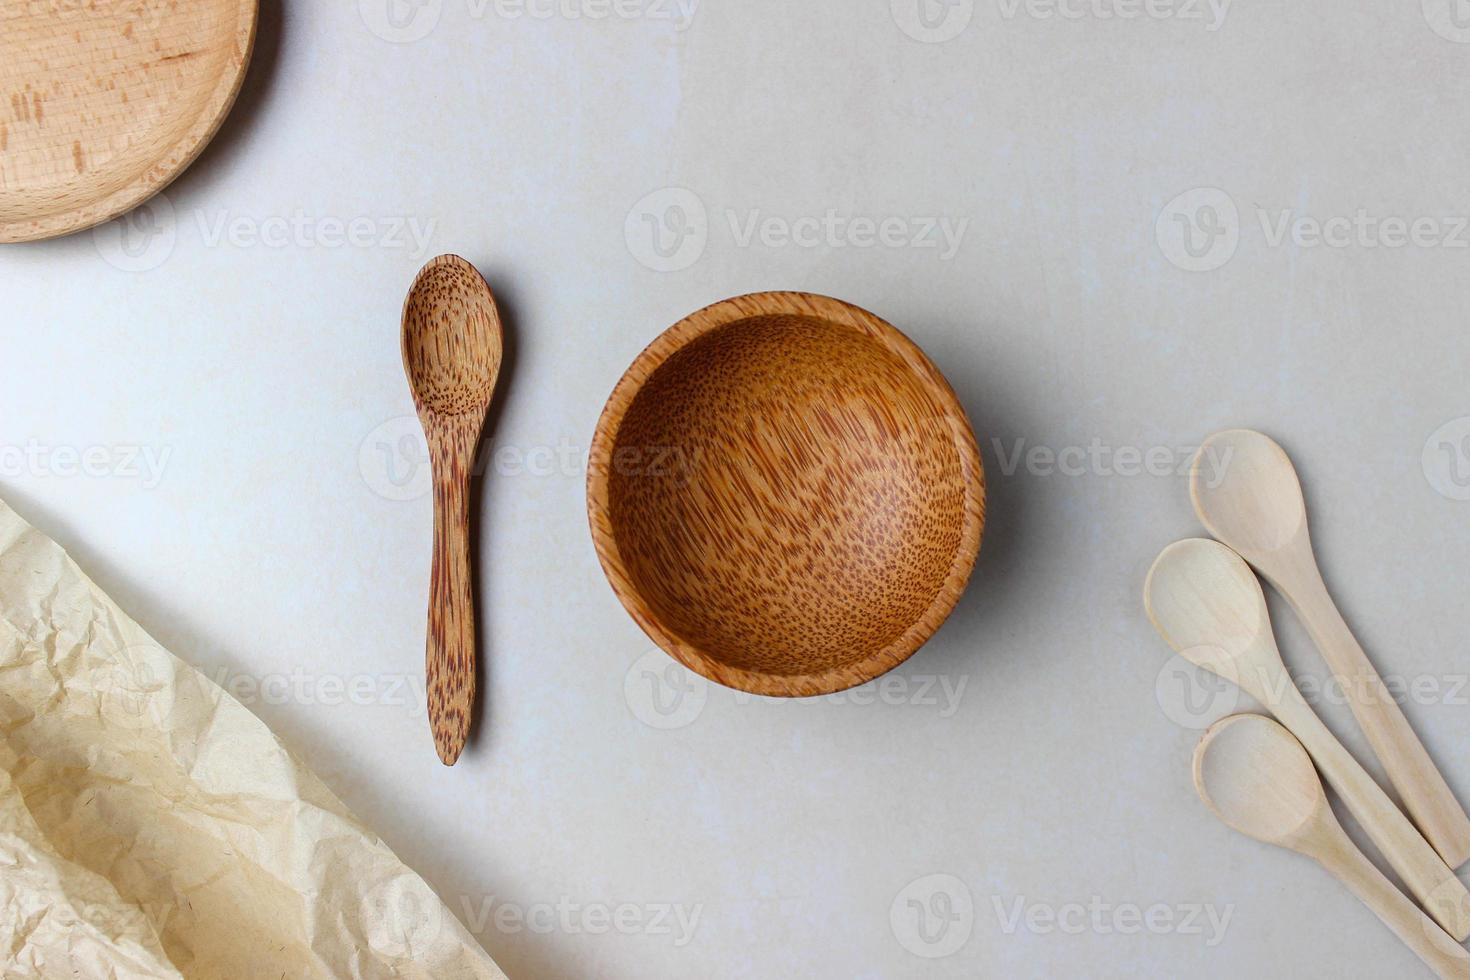 Wooden utensils on the kitchen table. Round wooden plates, a wooden spoon. The concept of serving, cooking, interior details. Top view photo